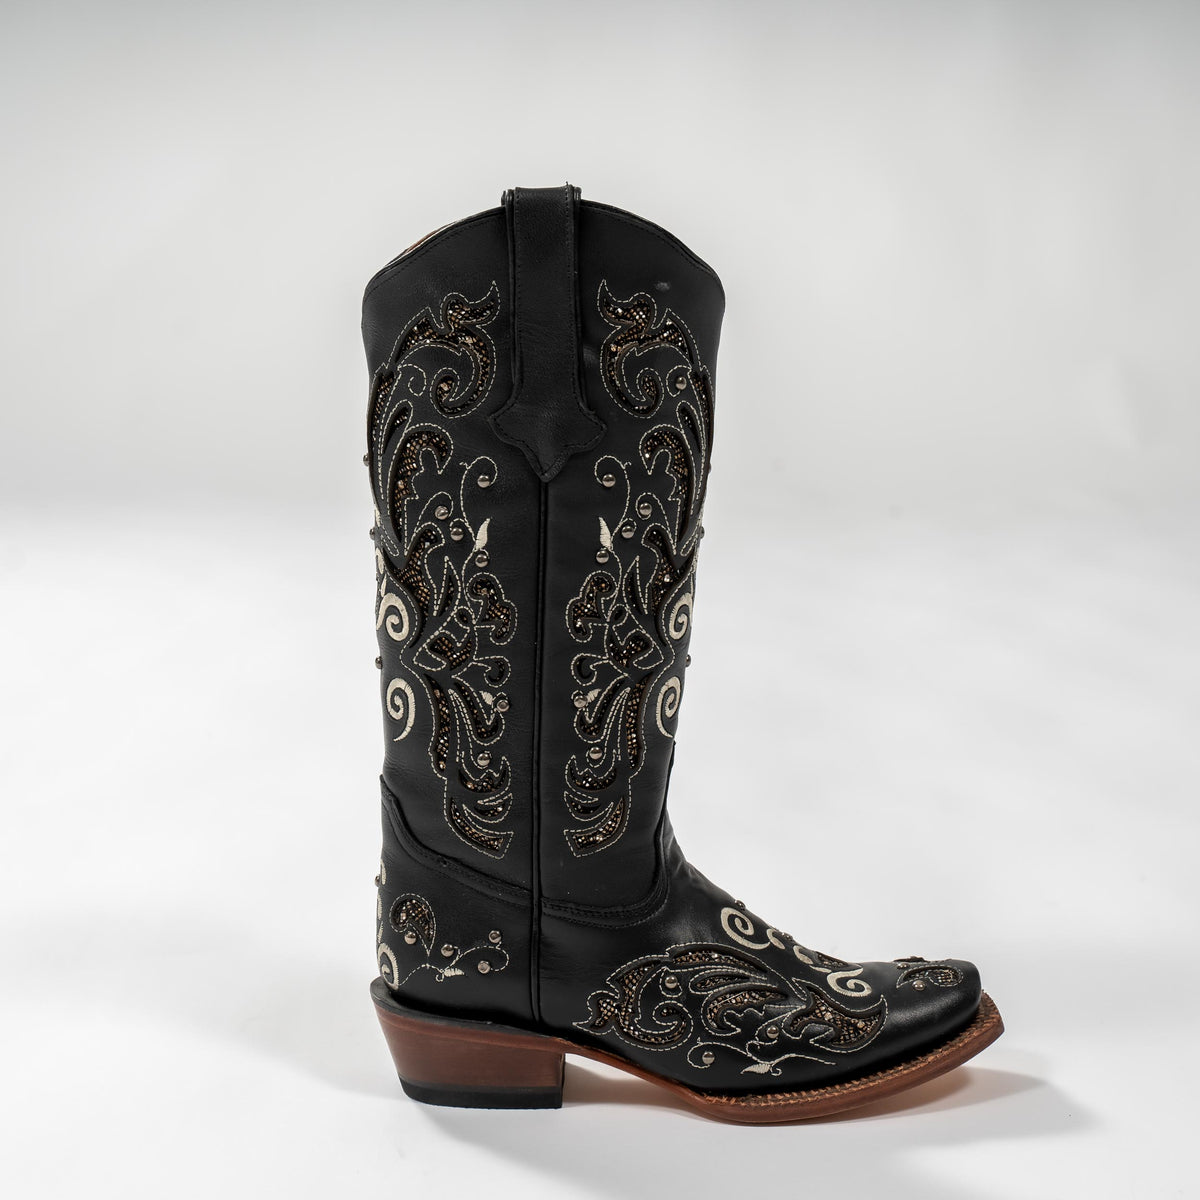 Tanner Mark Boot Venice Black, midnight black  with silver shimmer inlay Women's Cowboy boot